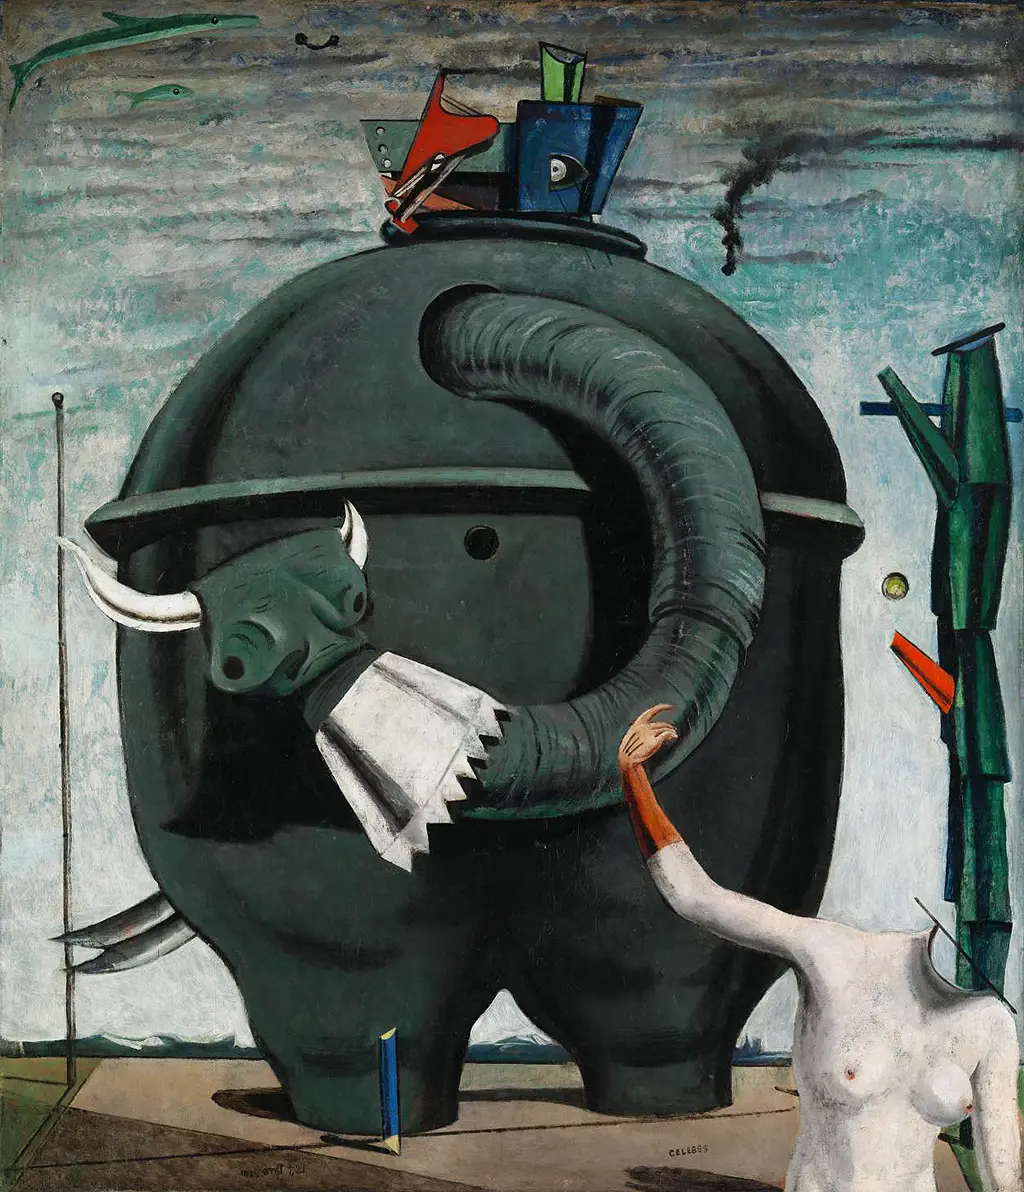 The Elephant Celebes in Detail Max Ernst